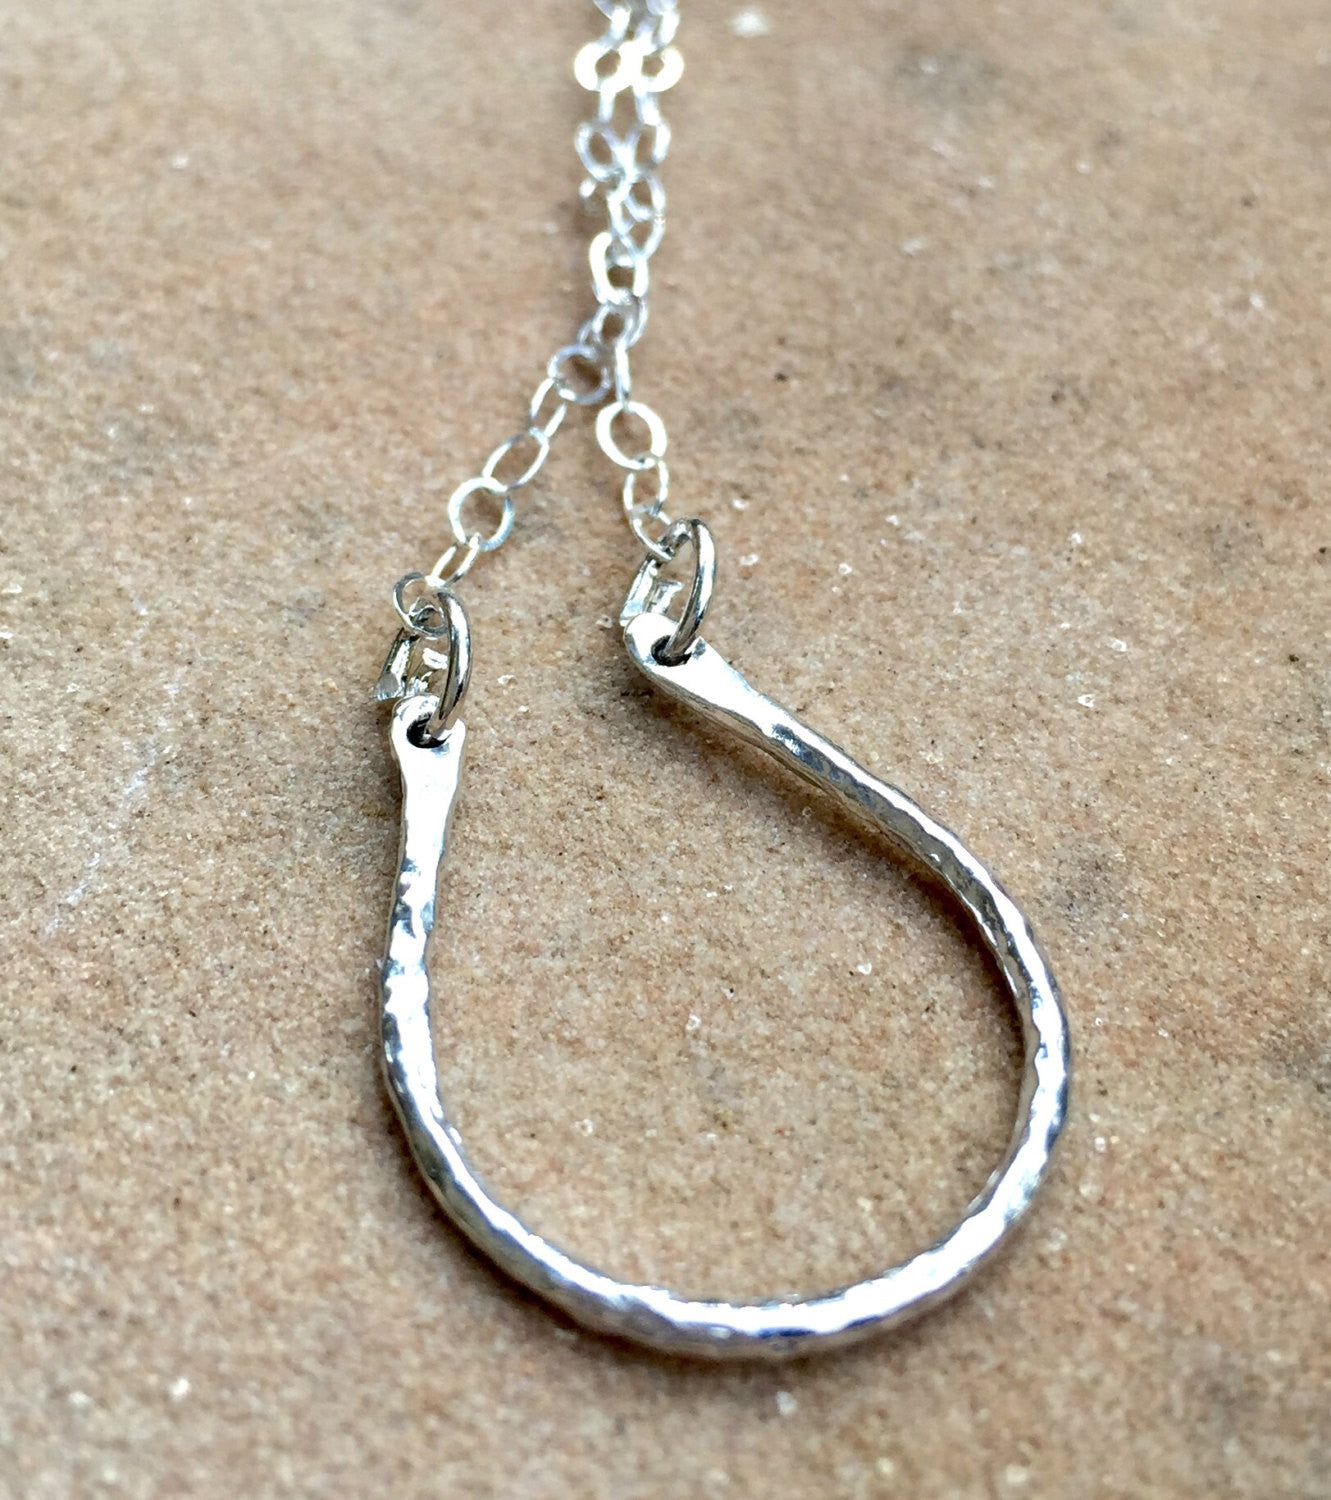 Horseshoe Necklace, Horseshoe Jewely, Cowgirl Necklace, Country Necklace, Vaentine Gifts, natashaaloha - Natashaaloha, jewelry, bracelets, necklace, keychains, fishing lures, gifts for men, charms, personalized, 